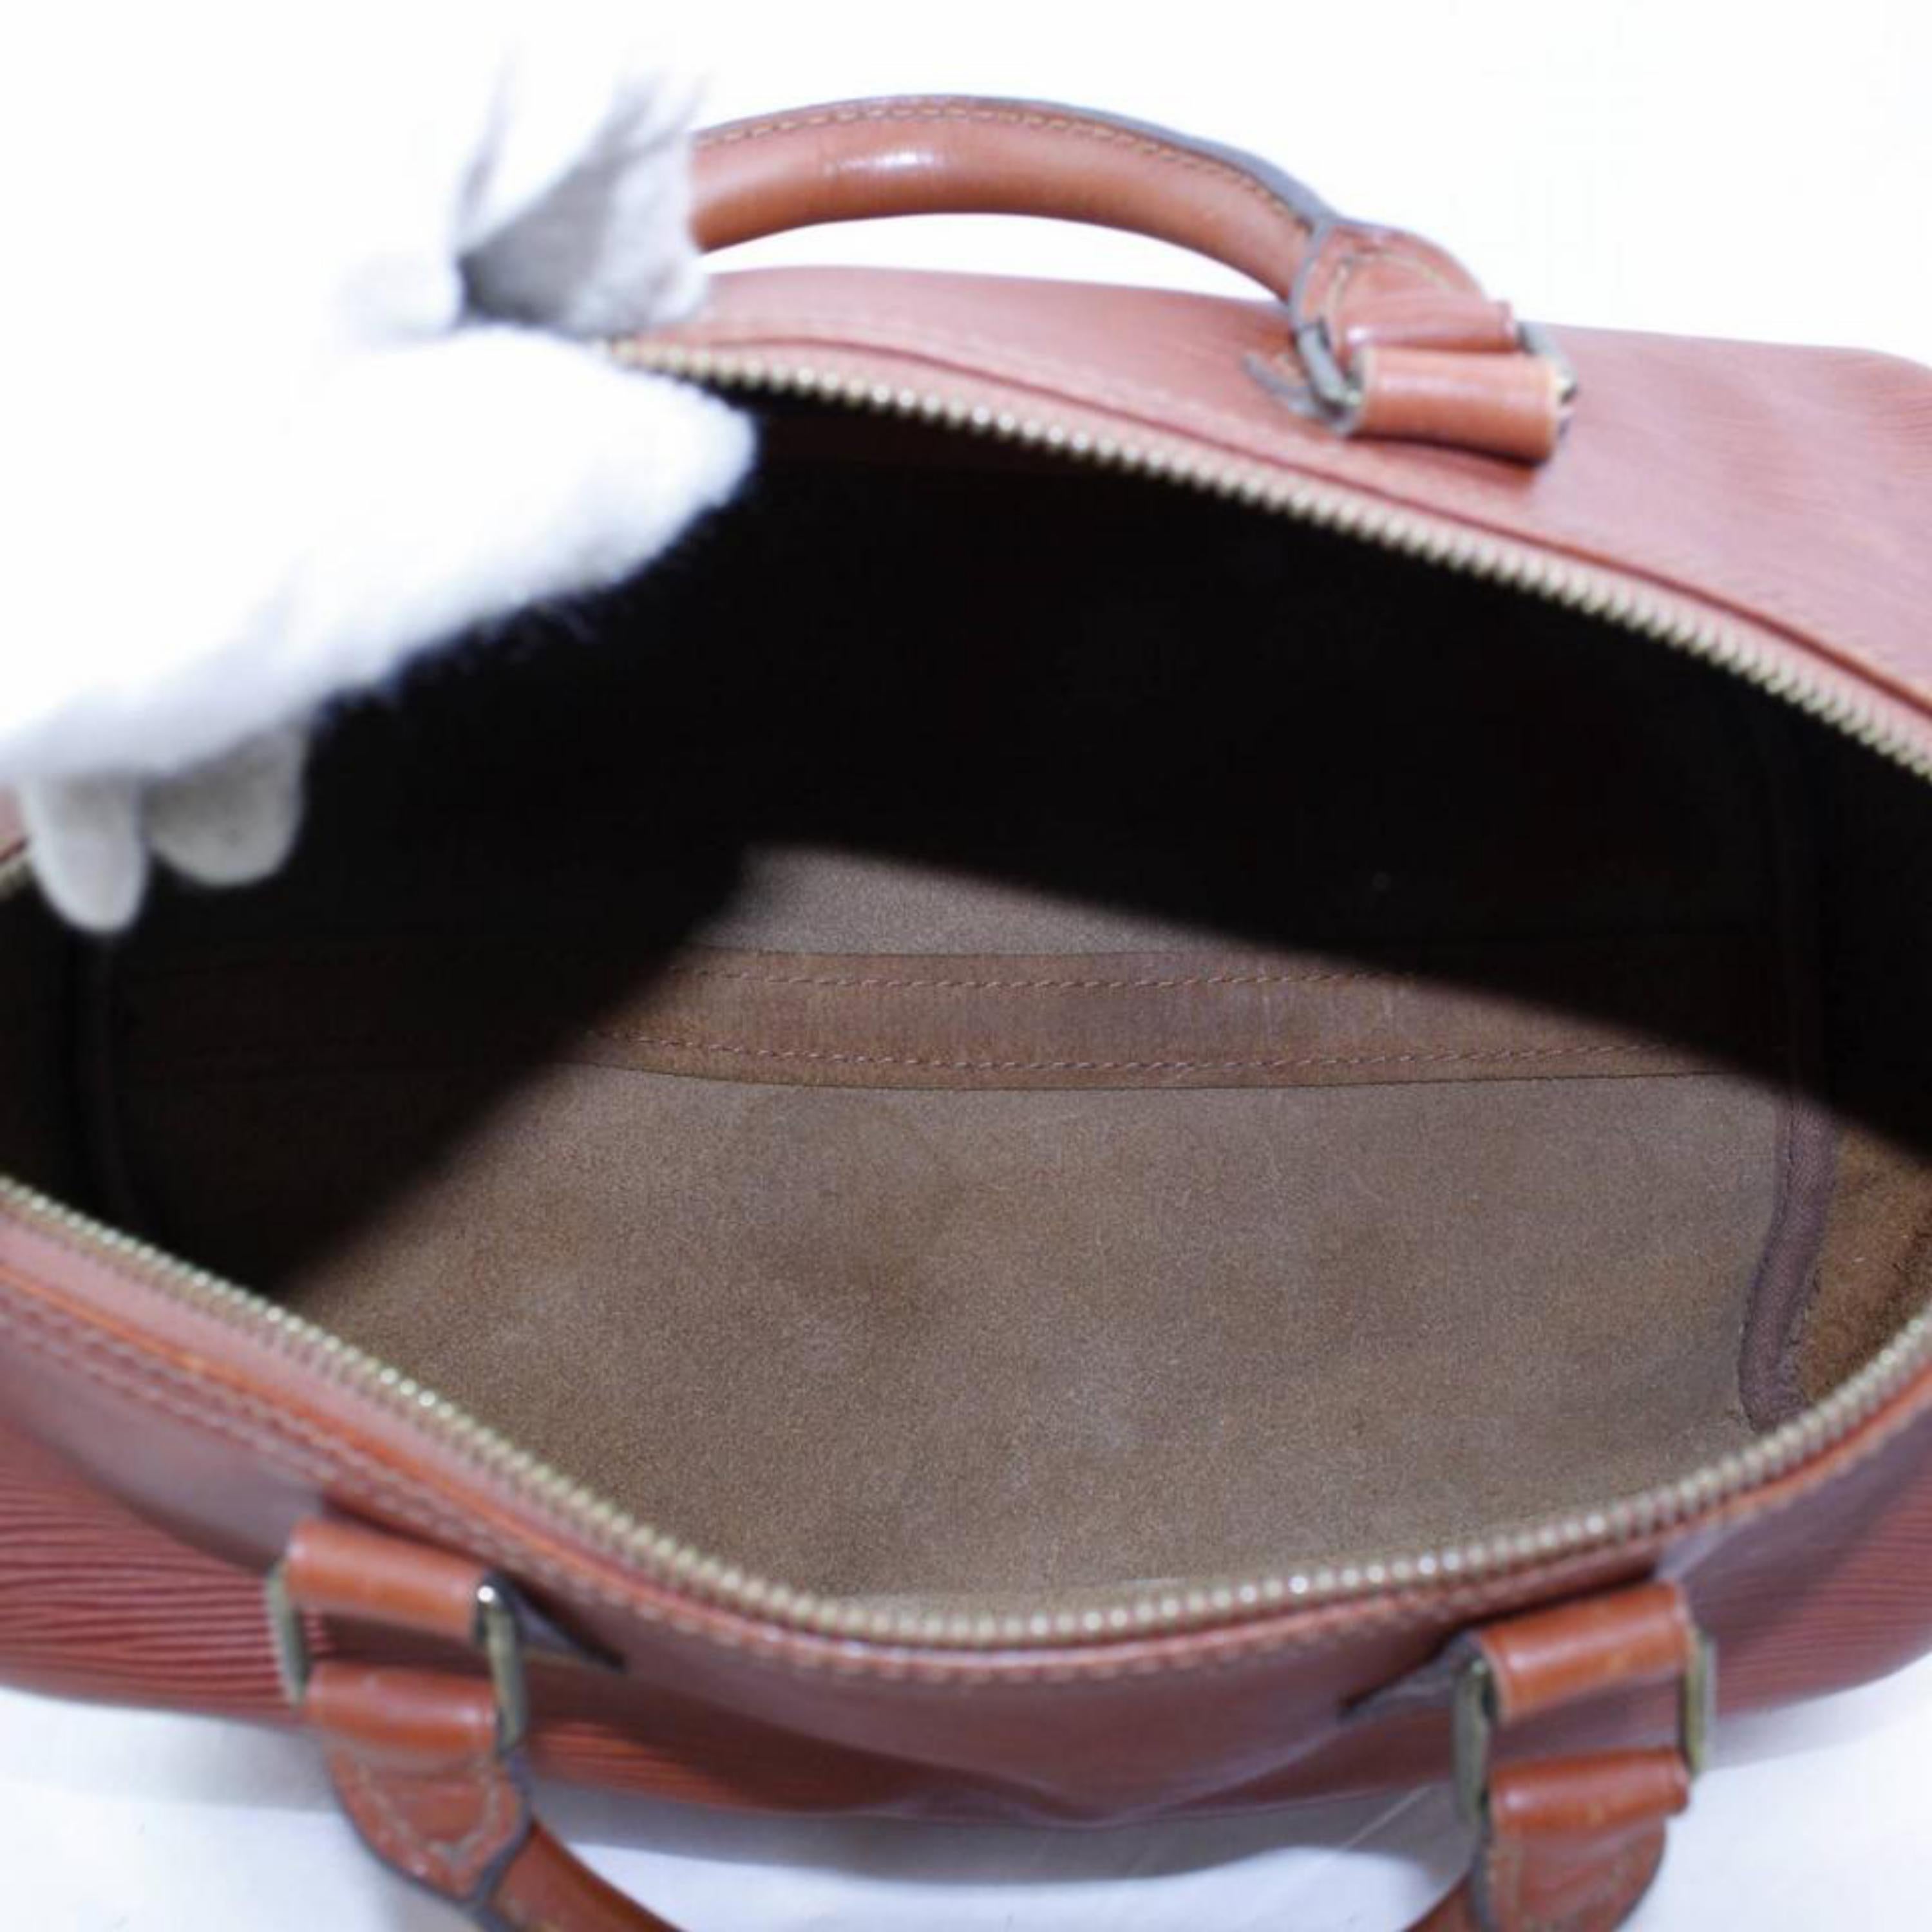 Louis Vuitton Speedy Kenya 30 866818 Brown Leather Satchel In Good Condition For Sale In Forest Hills, NY